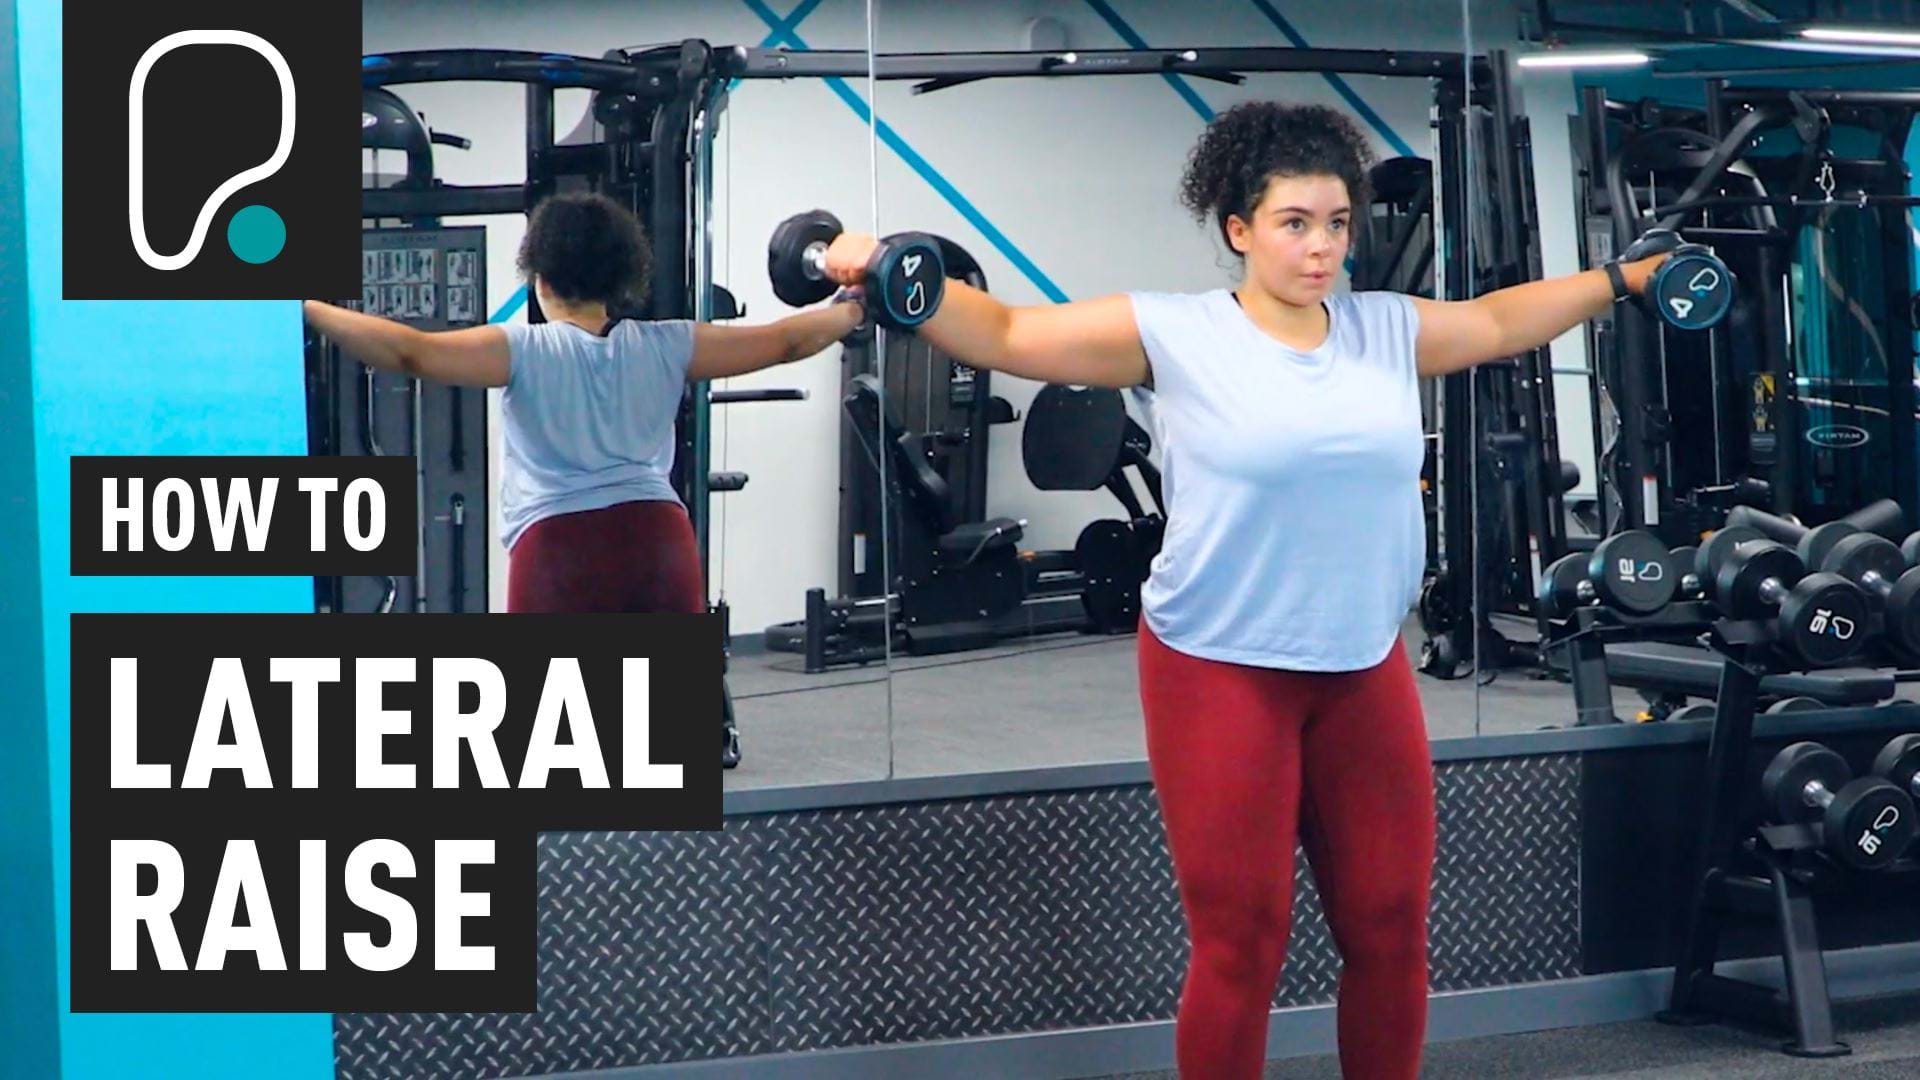 Dumbbell front raise to lateral raise, Exercise Videos & Guides